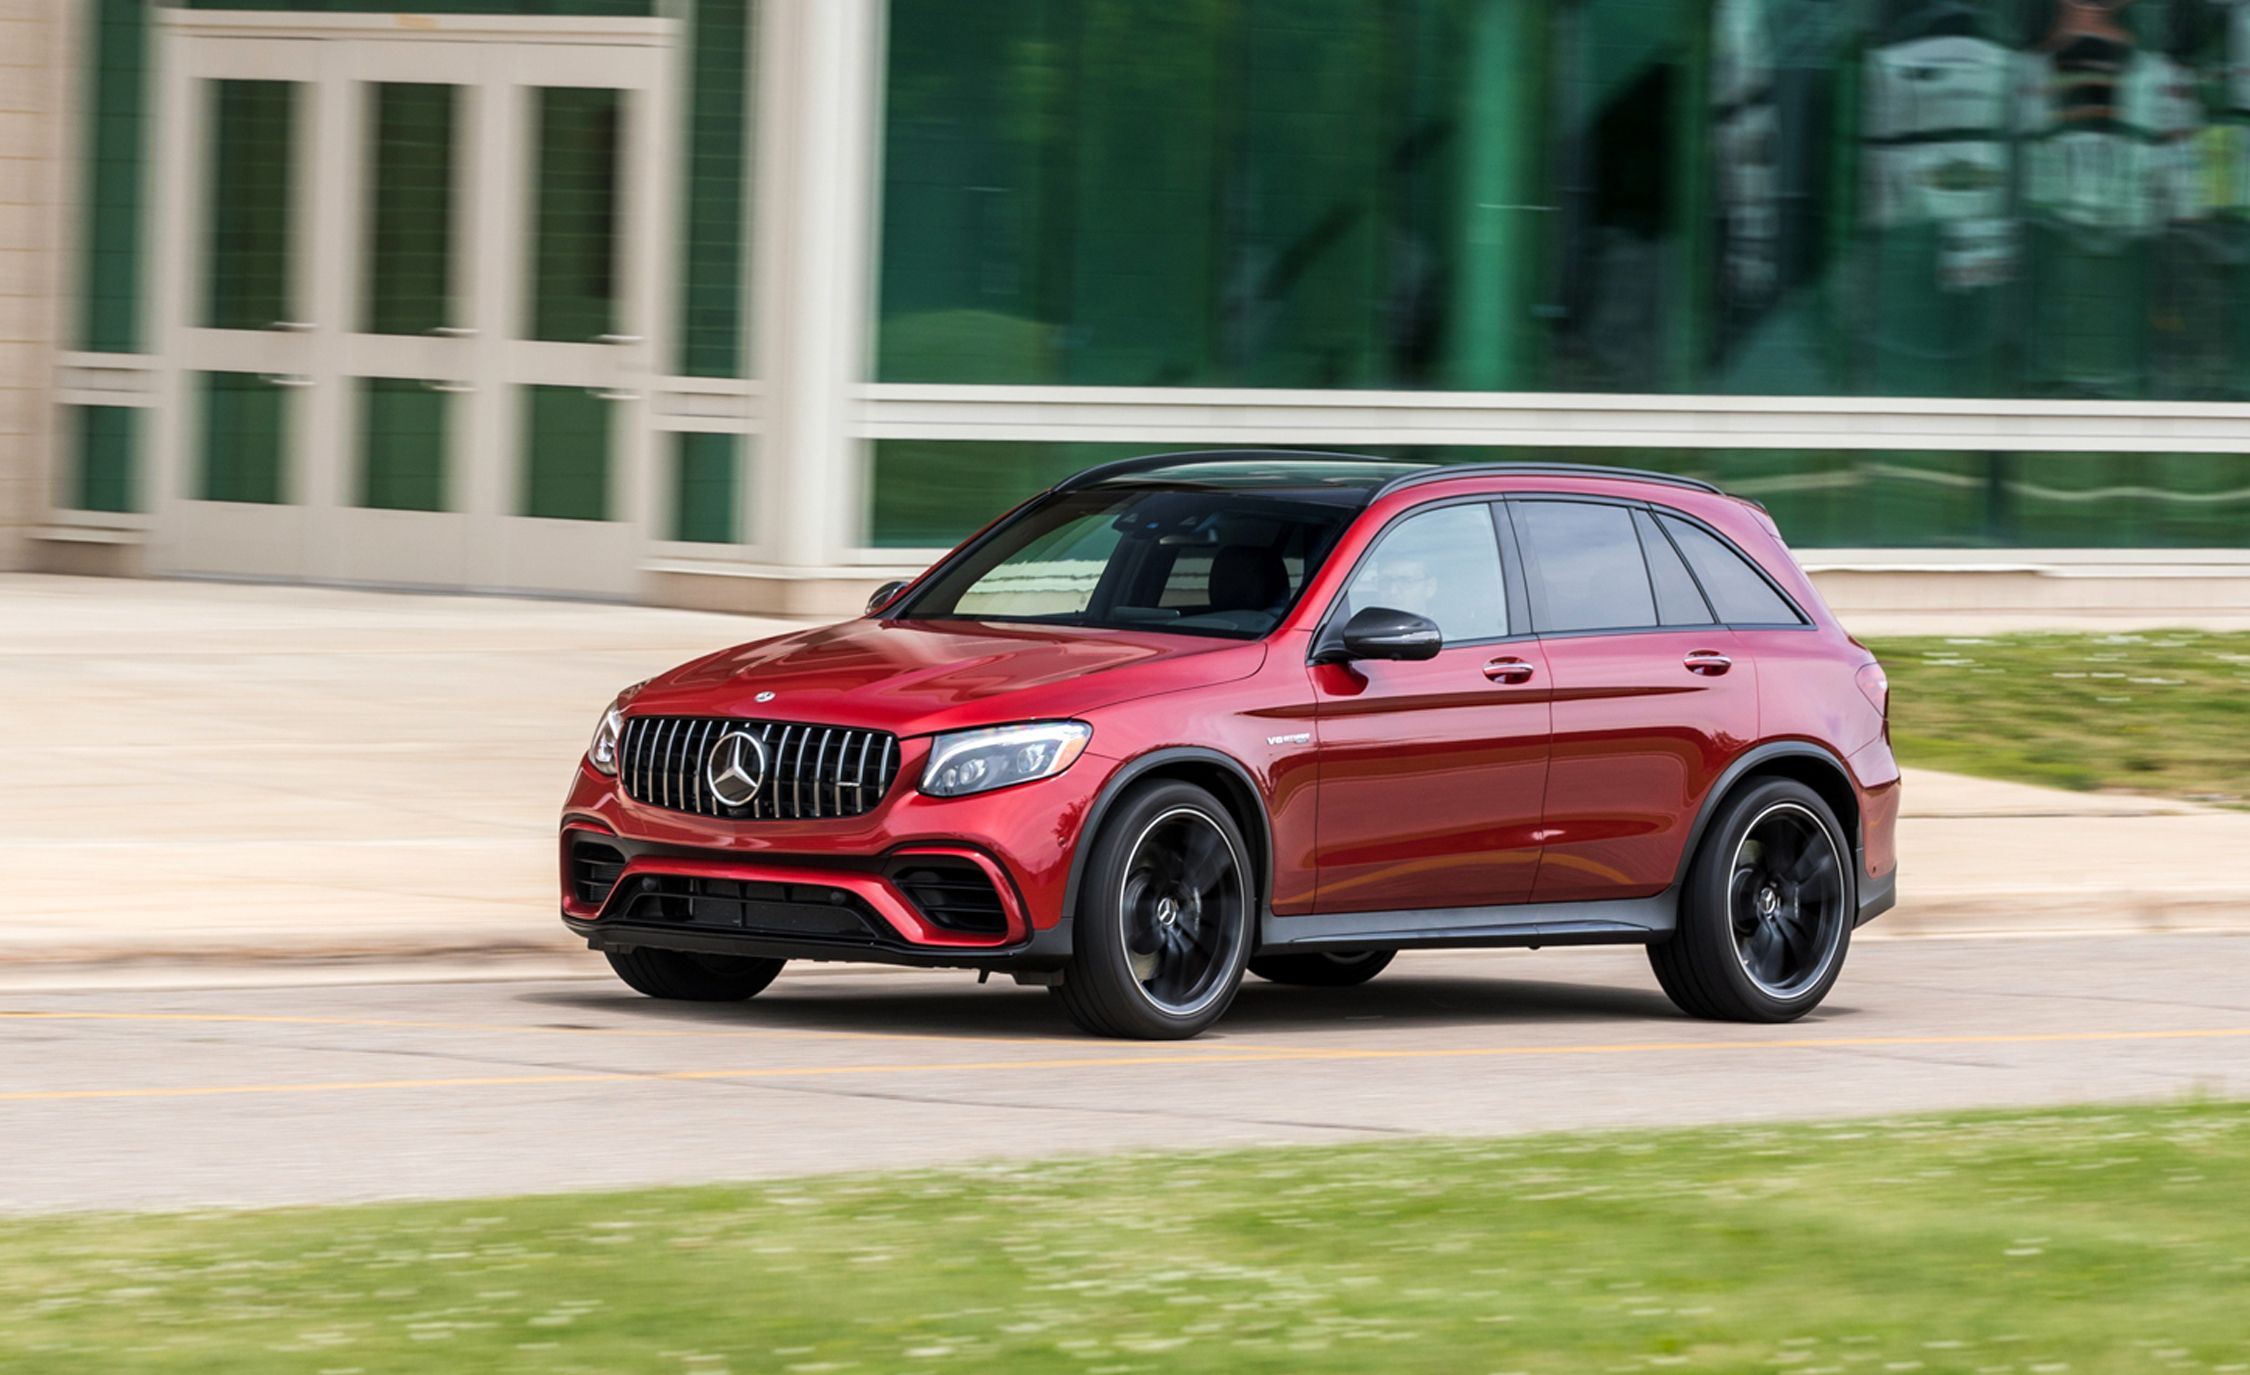 2018 Mercedes-AMG GLC43 4MATIC / GLC63 4MATIC Review, Pricing, and Specs